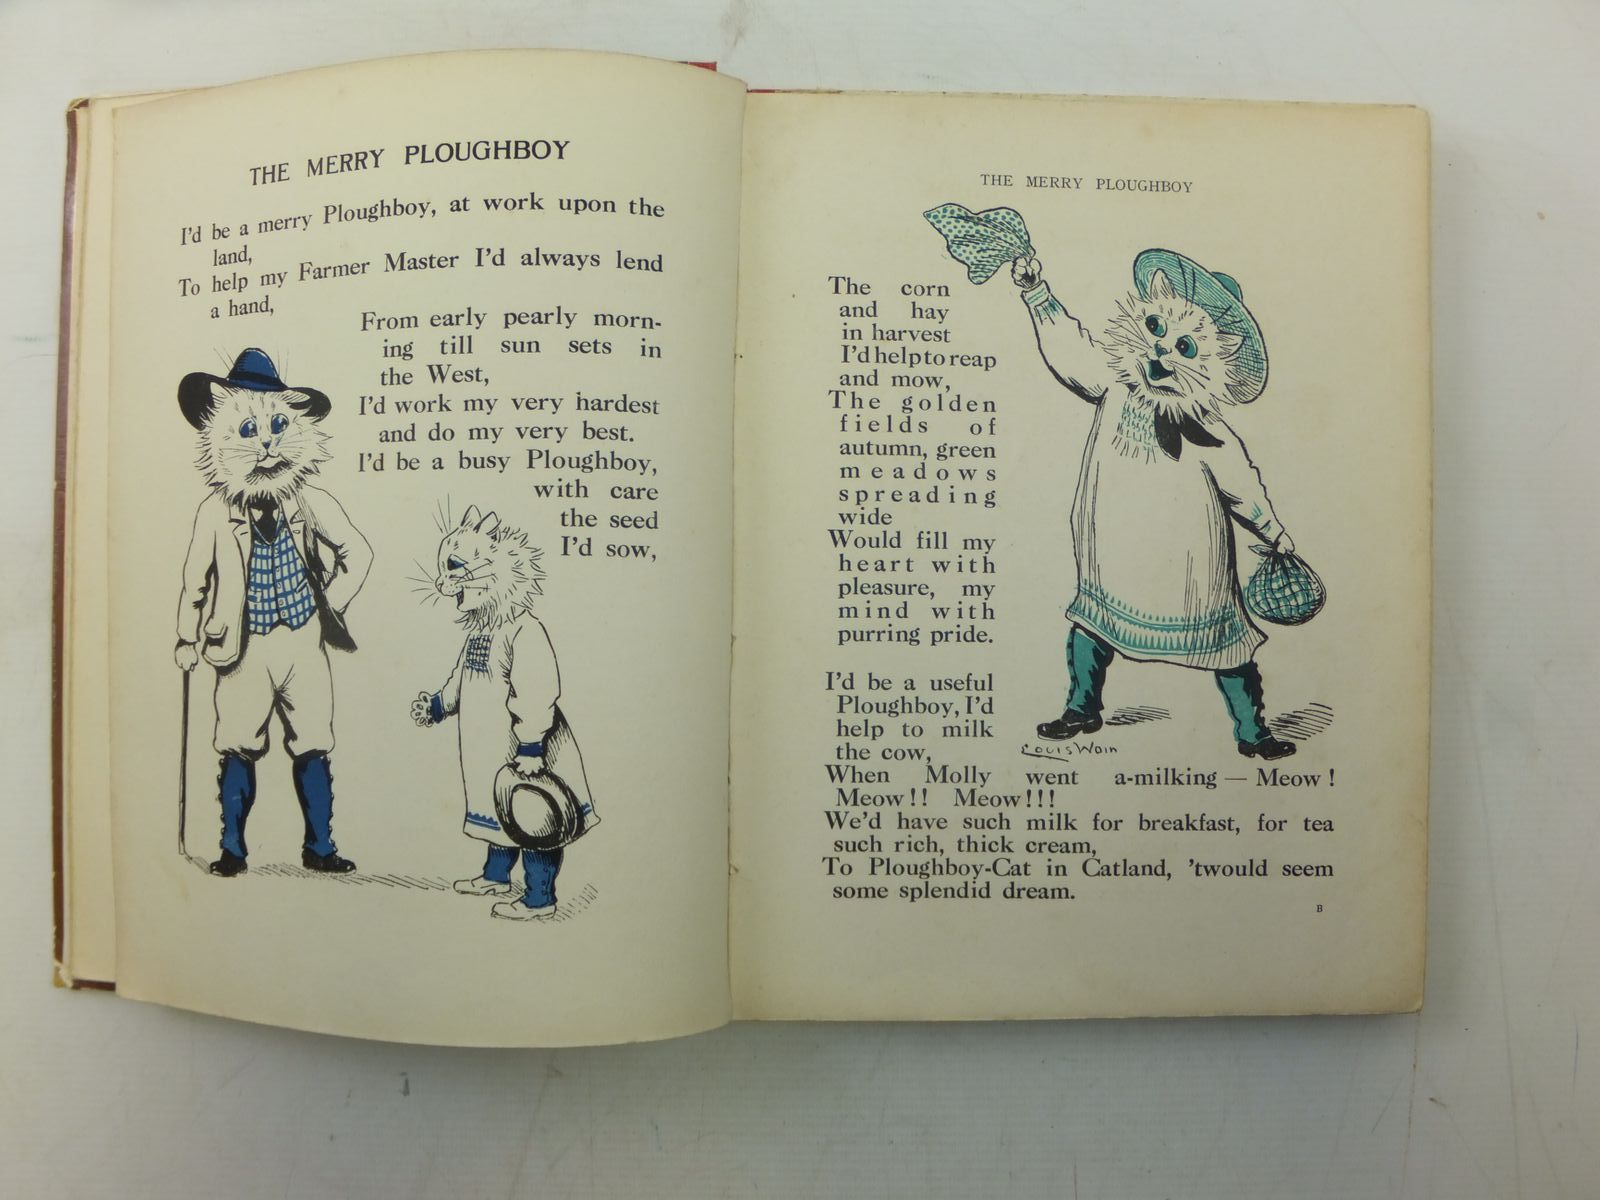 Photo of SUCH FUN written by Gale, Norman
Floyd, Grace C.
et al, illustrated by Wain, Louis published by Raphael Tuck & Sons Ltd. (STOCK CODE: 2119056)  for sale by Stella & Rose's Books